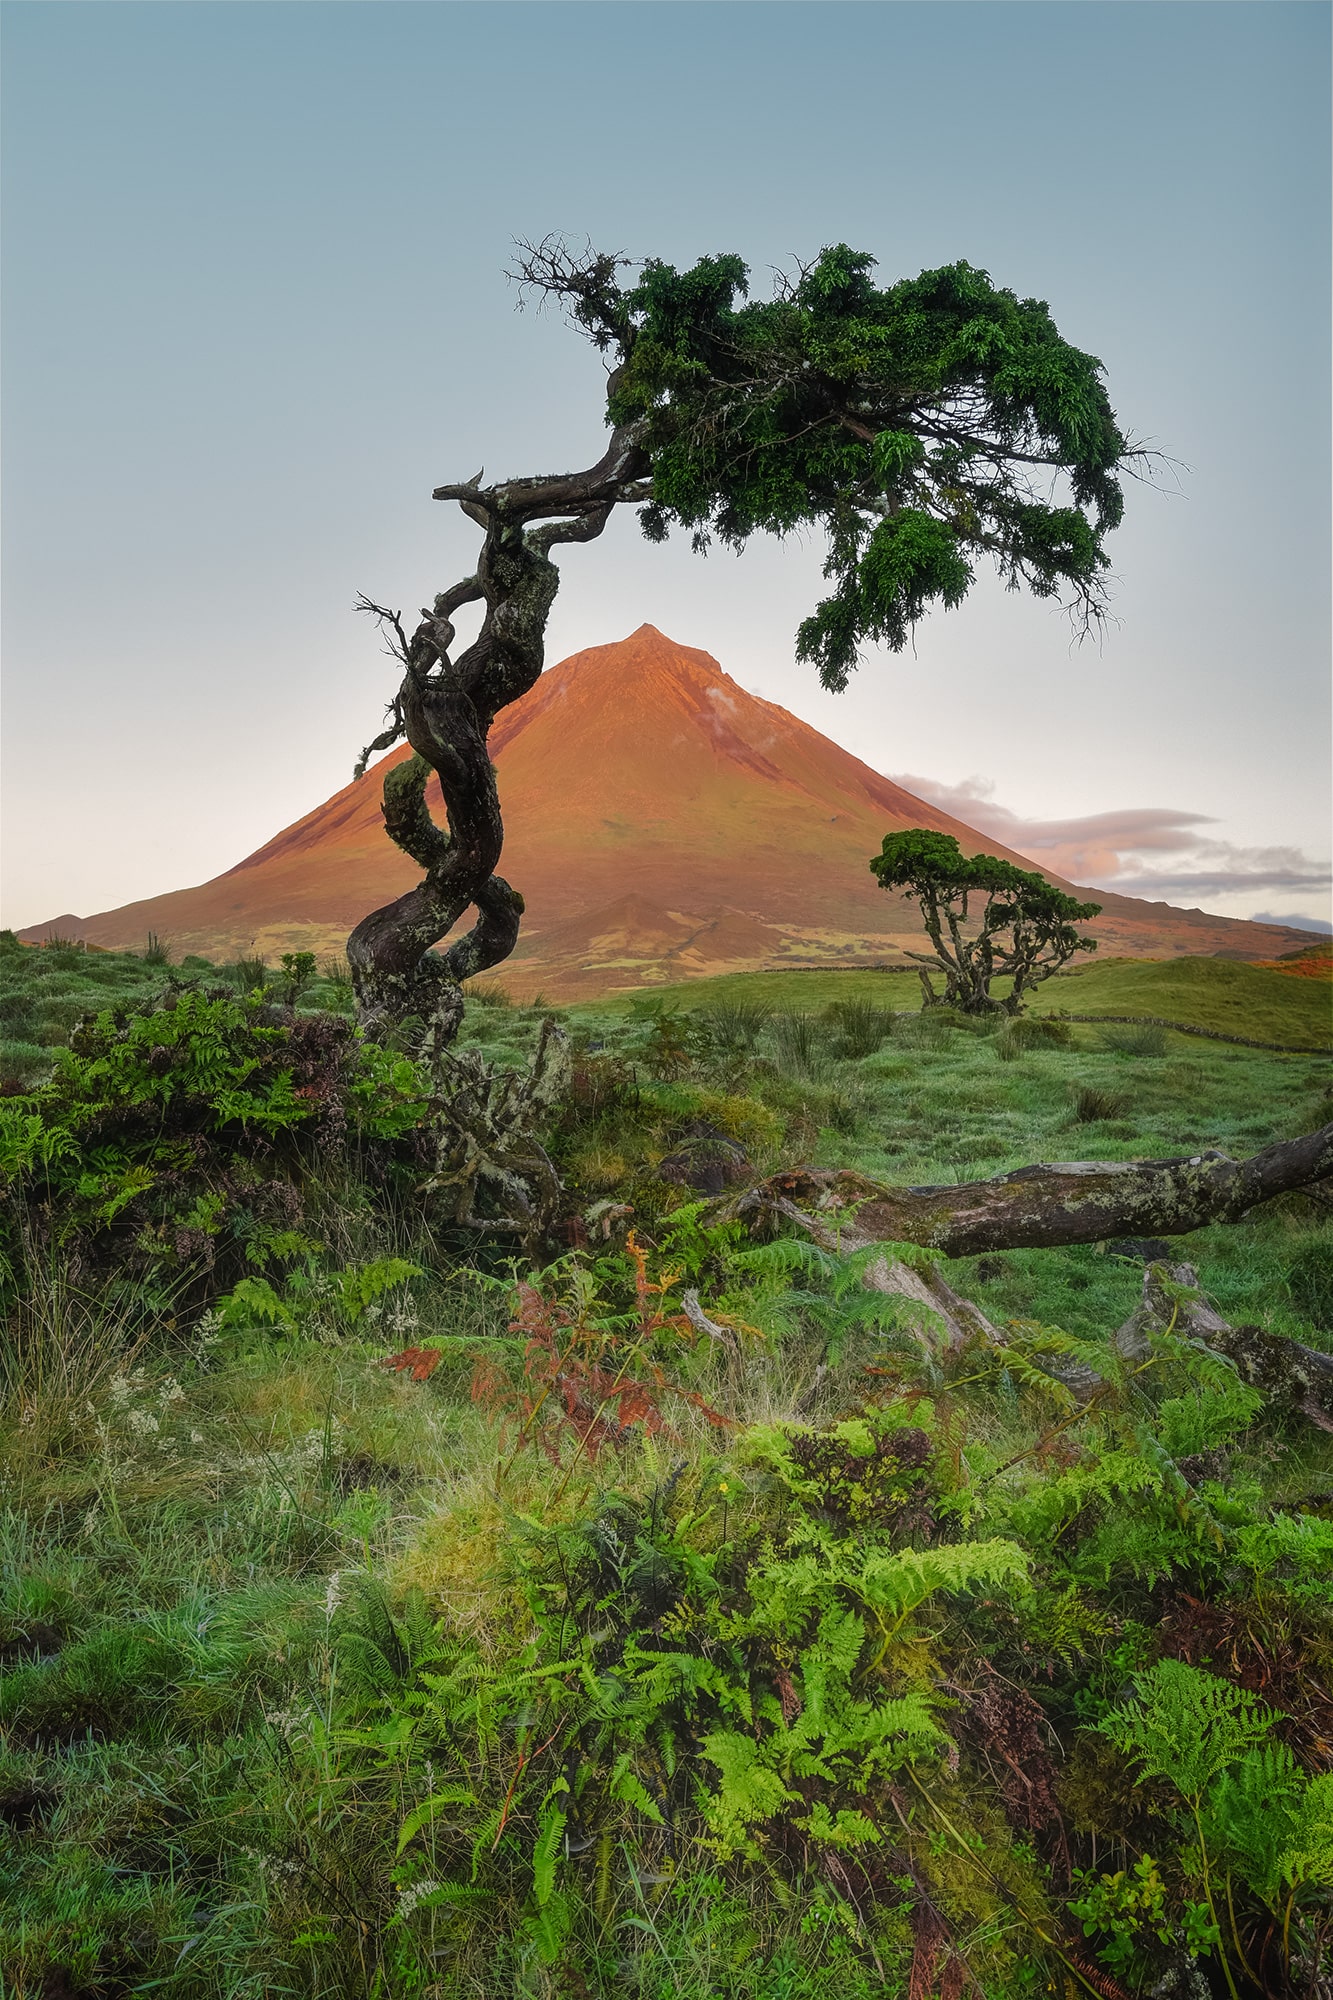 Landscape photograph depicting the sunrise over Mount Pico in the Azores, Portugal. The orange light illuminates the volcano, creating a stunning contrast against the dawn sky. Captured during a travel expedition, showcasing the natural beauty of Portugal's landscape.